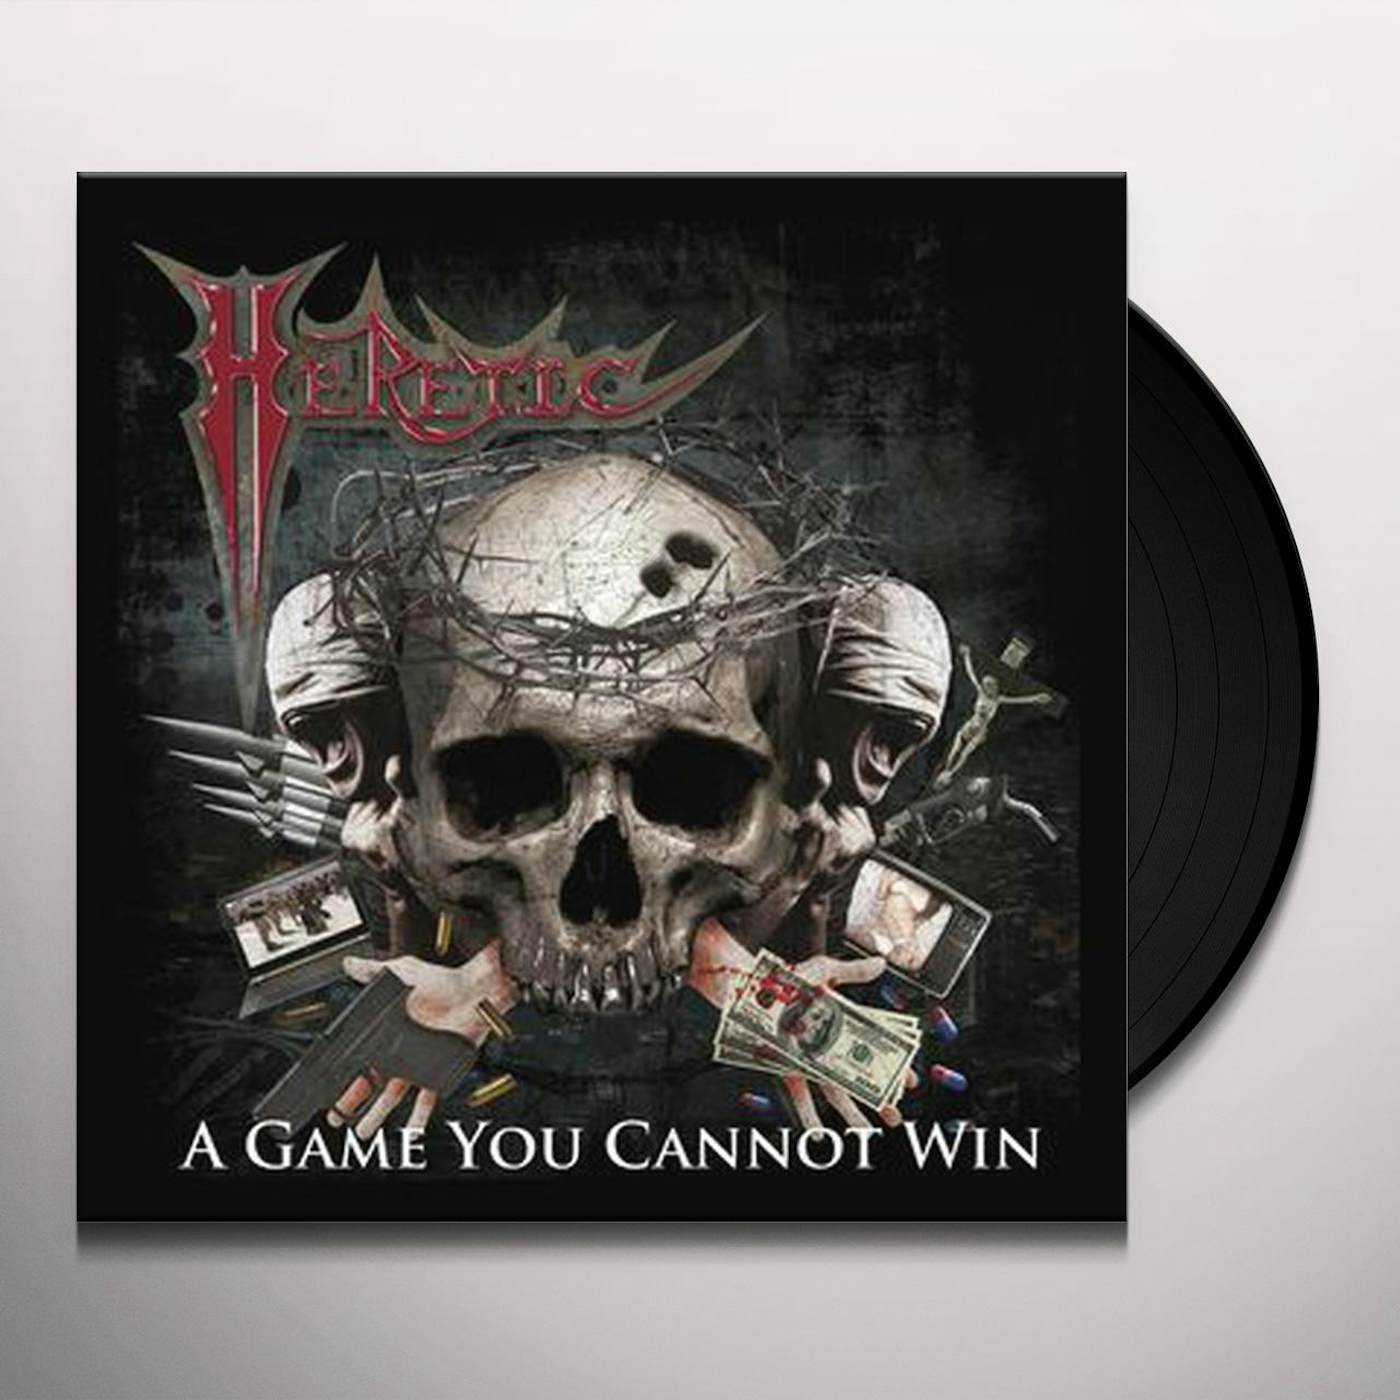 Heretic GAME YOU CANNOT WIN Vinyl Record